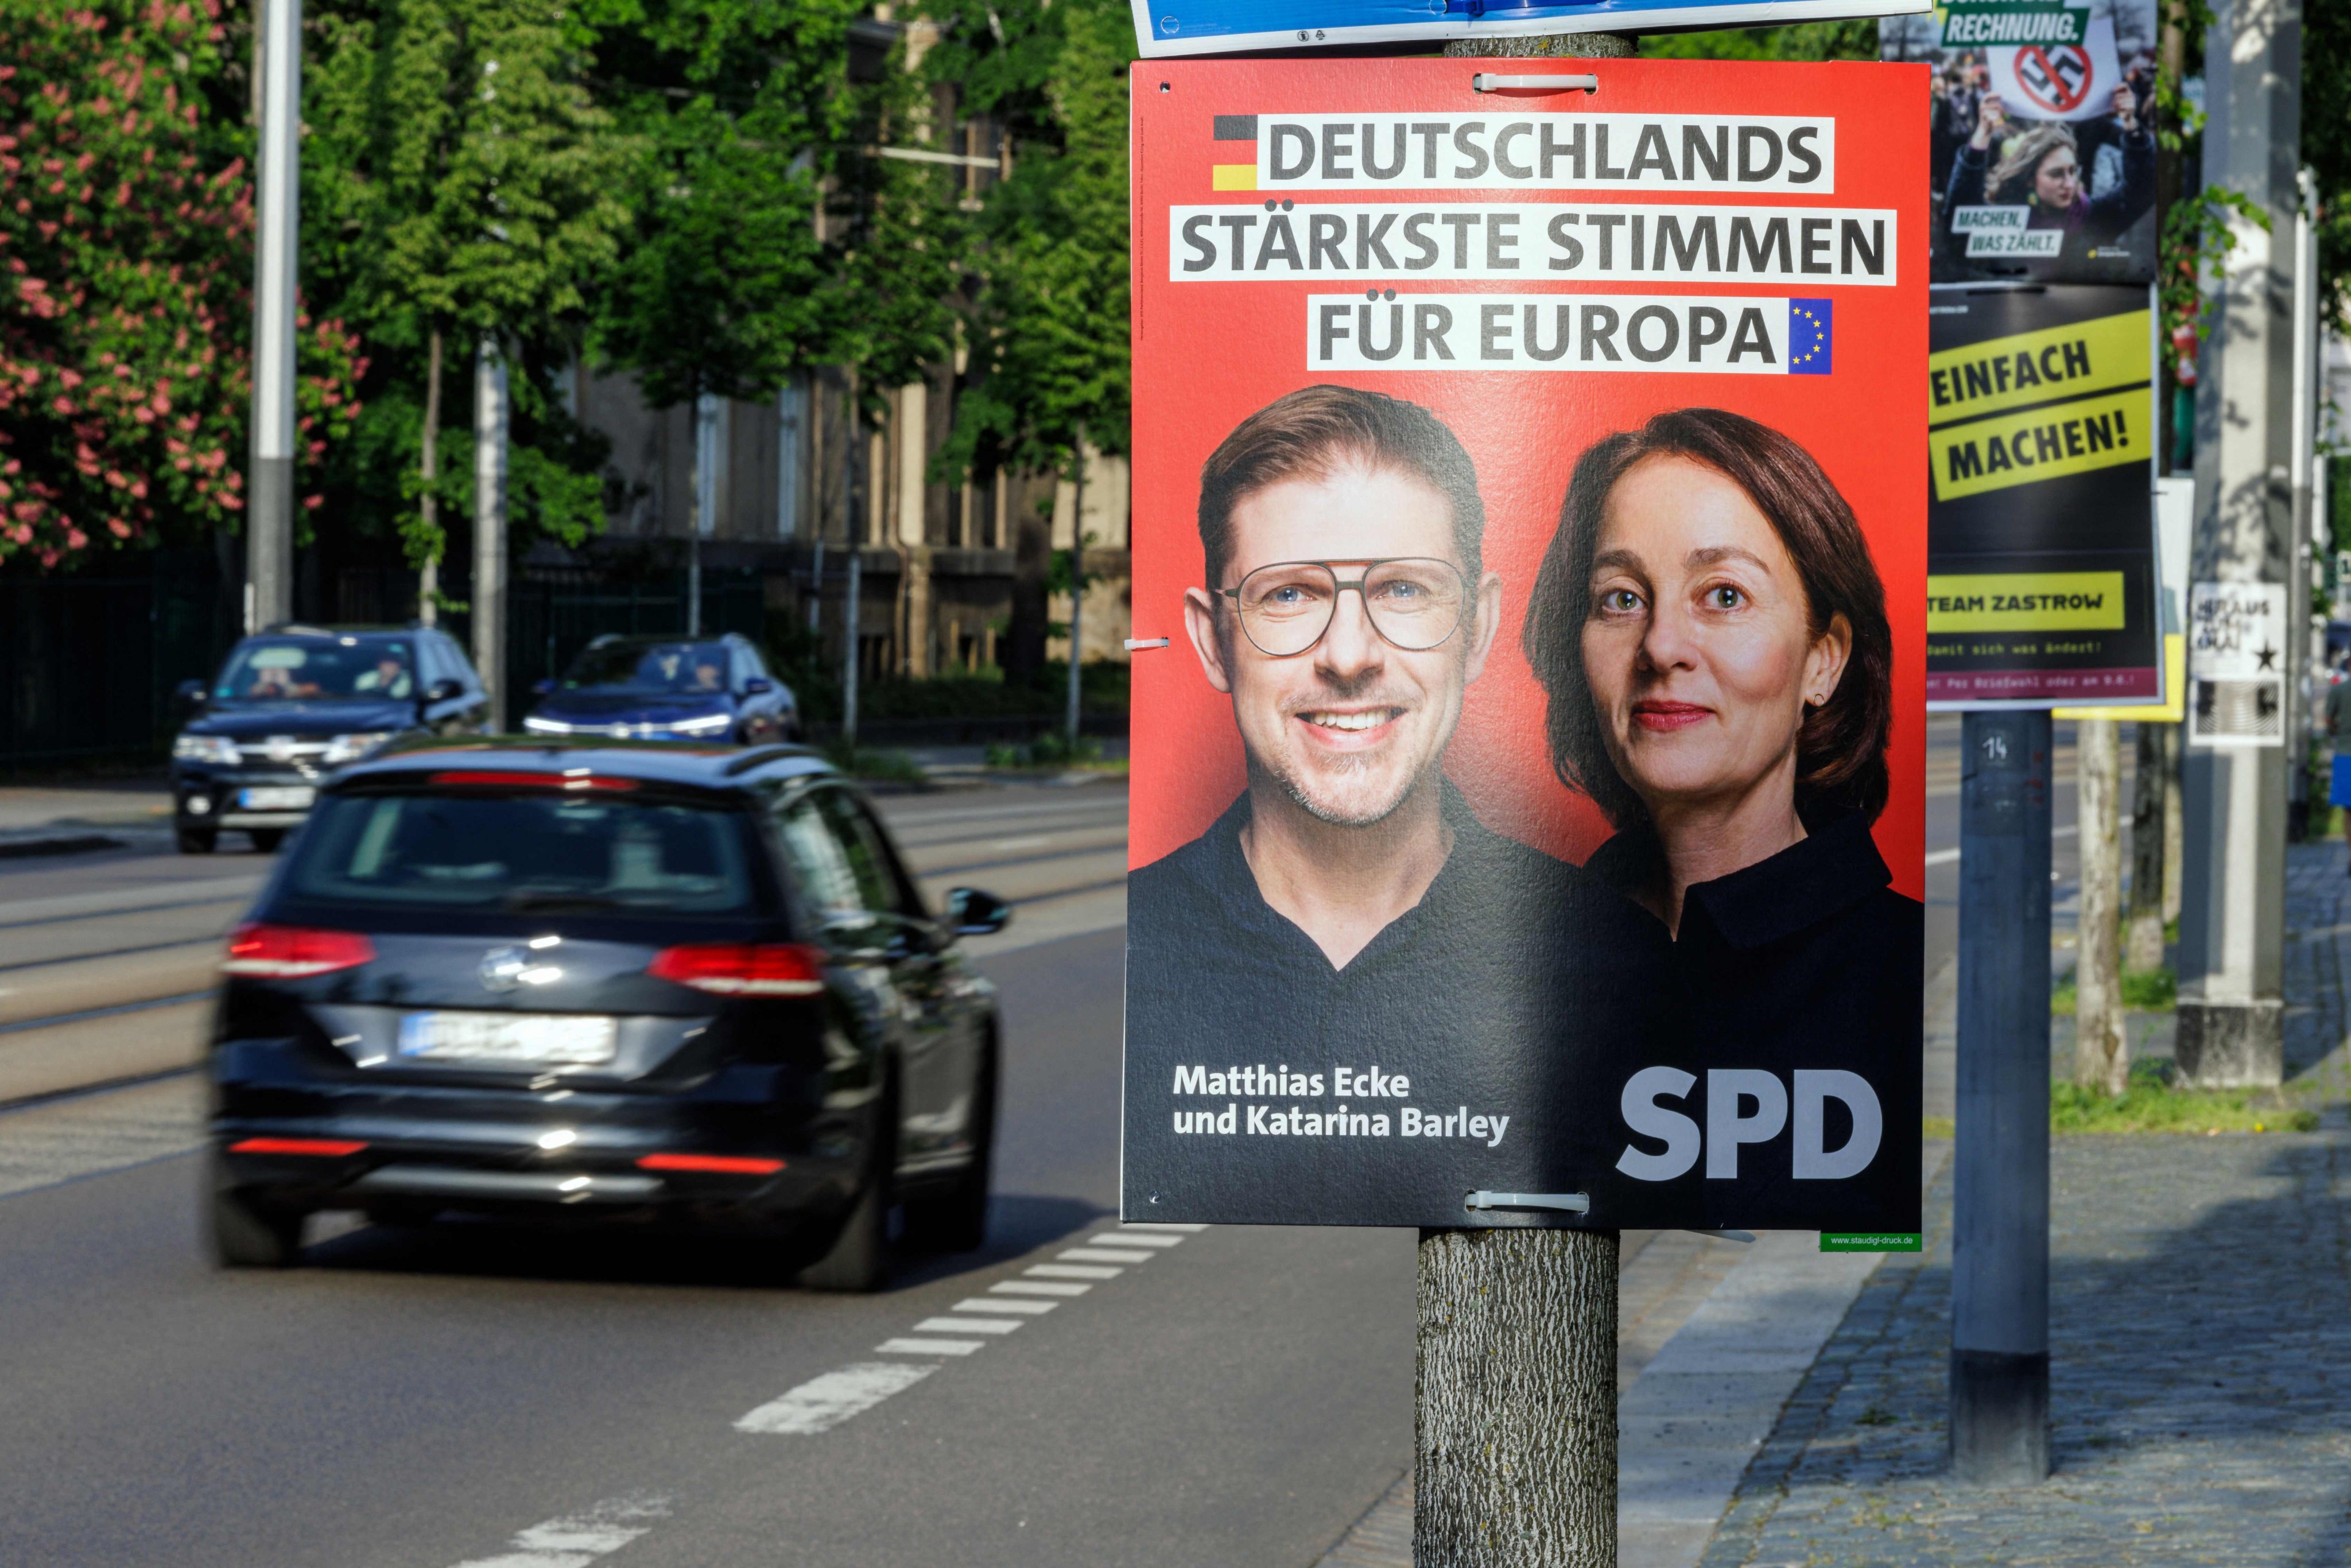 An election poster in Dresden showing Germany’s Social Democratic Party lead candidates Matthias Ecke (L) and Katarina Barley for the upcoming European Parliament elections. Police said attackers beat Ecke up on Friday night. Photo: AFP